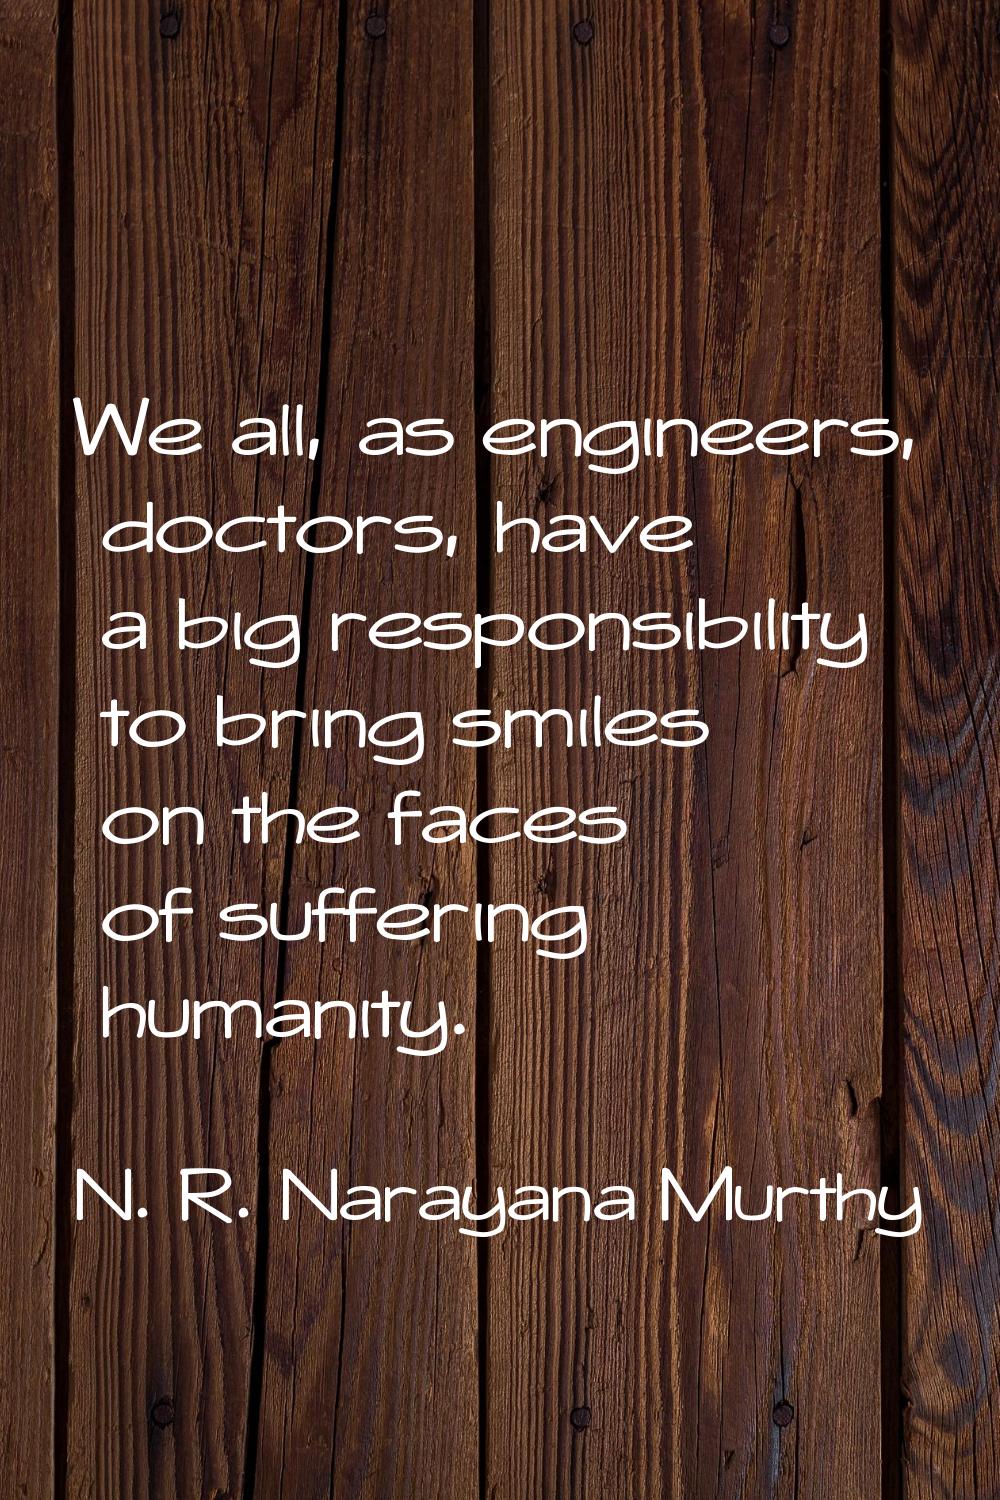 We all, as engineers, doctors, have a big responsibility to bring smiles on the faces of suffering 